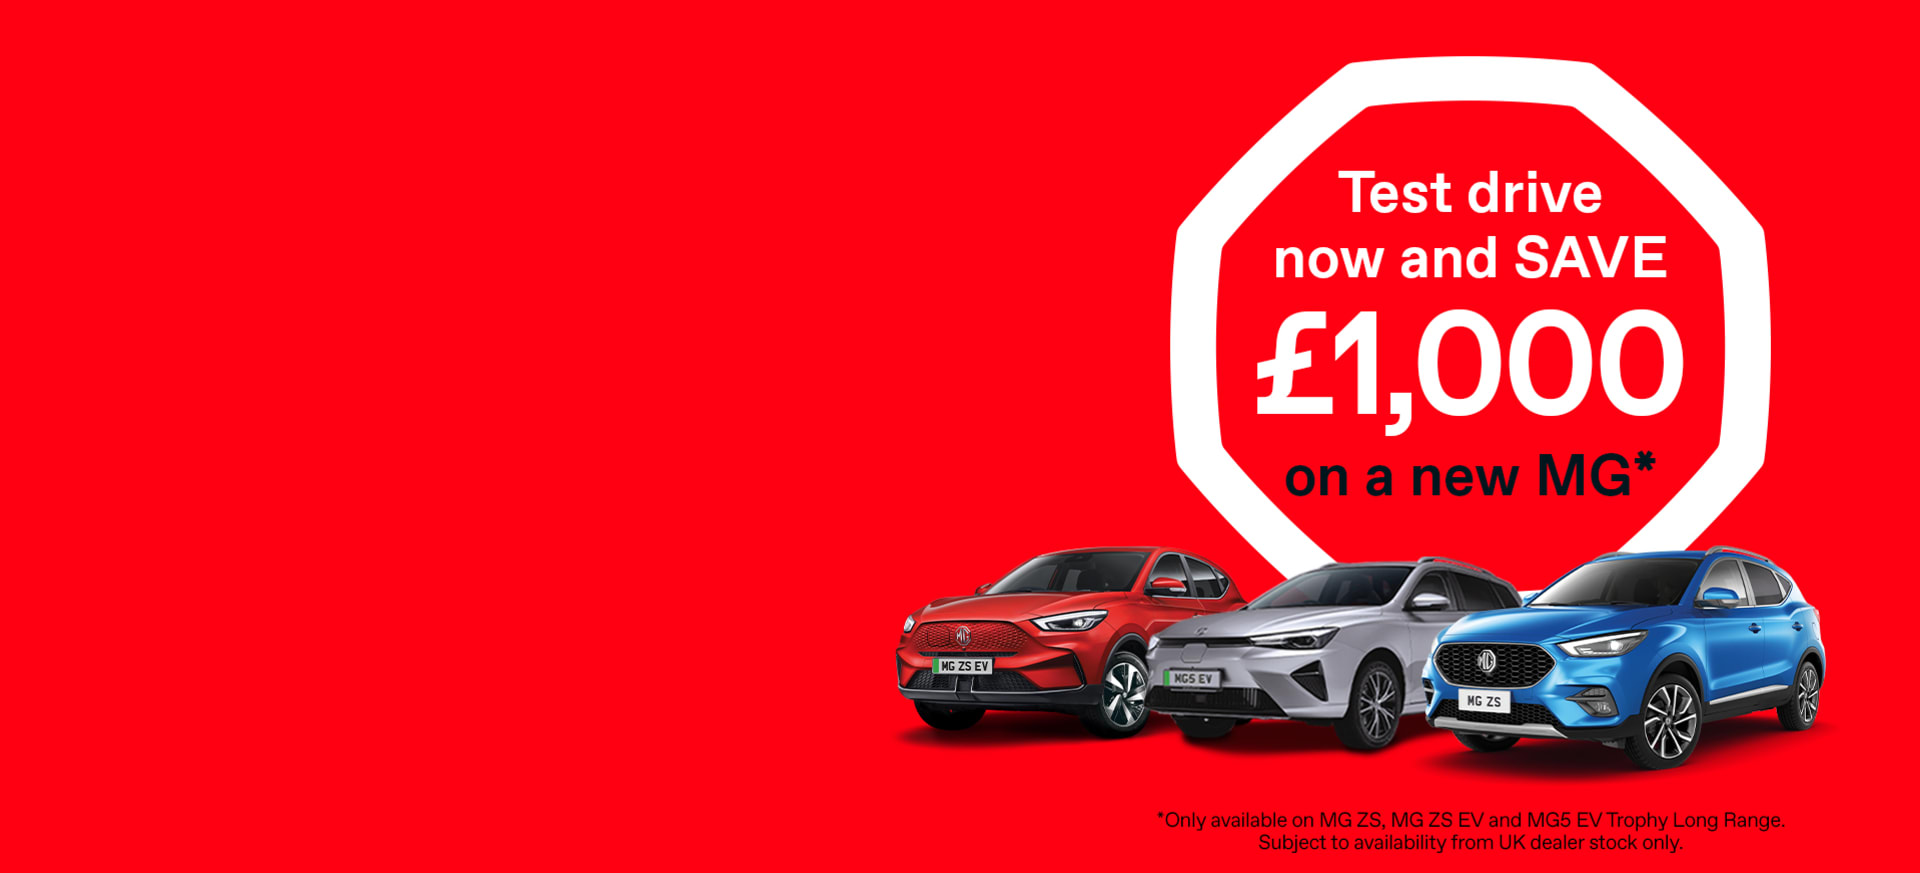 Get a lot MORE with £1,000 off a new MG